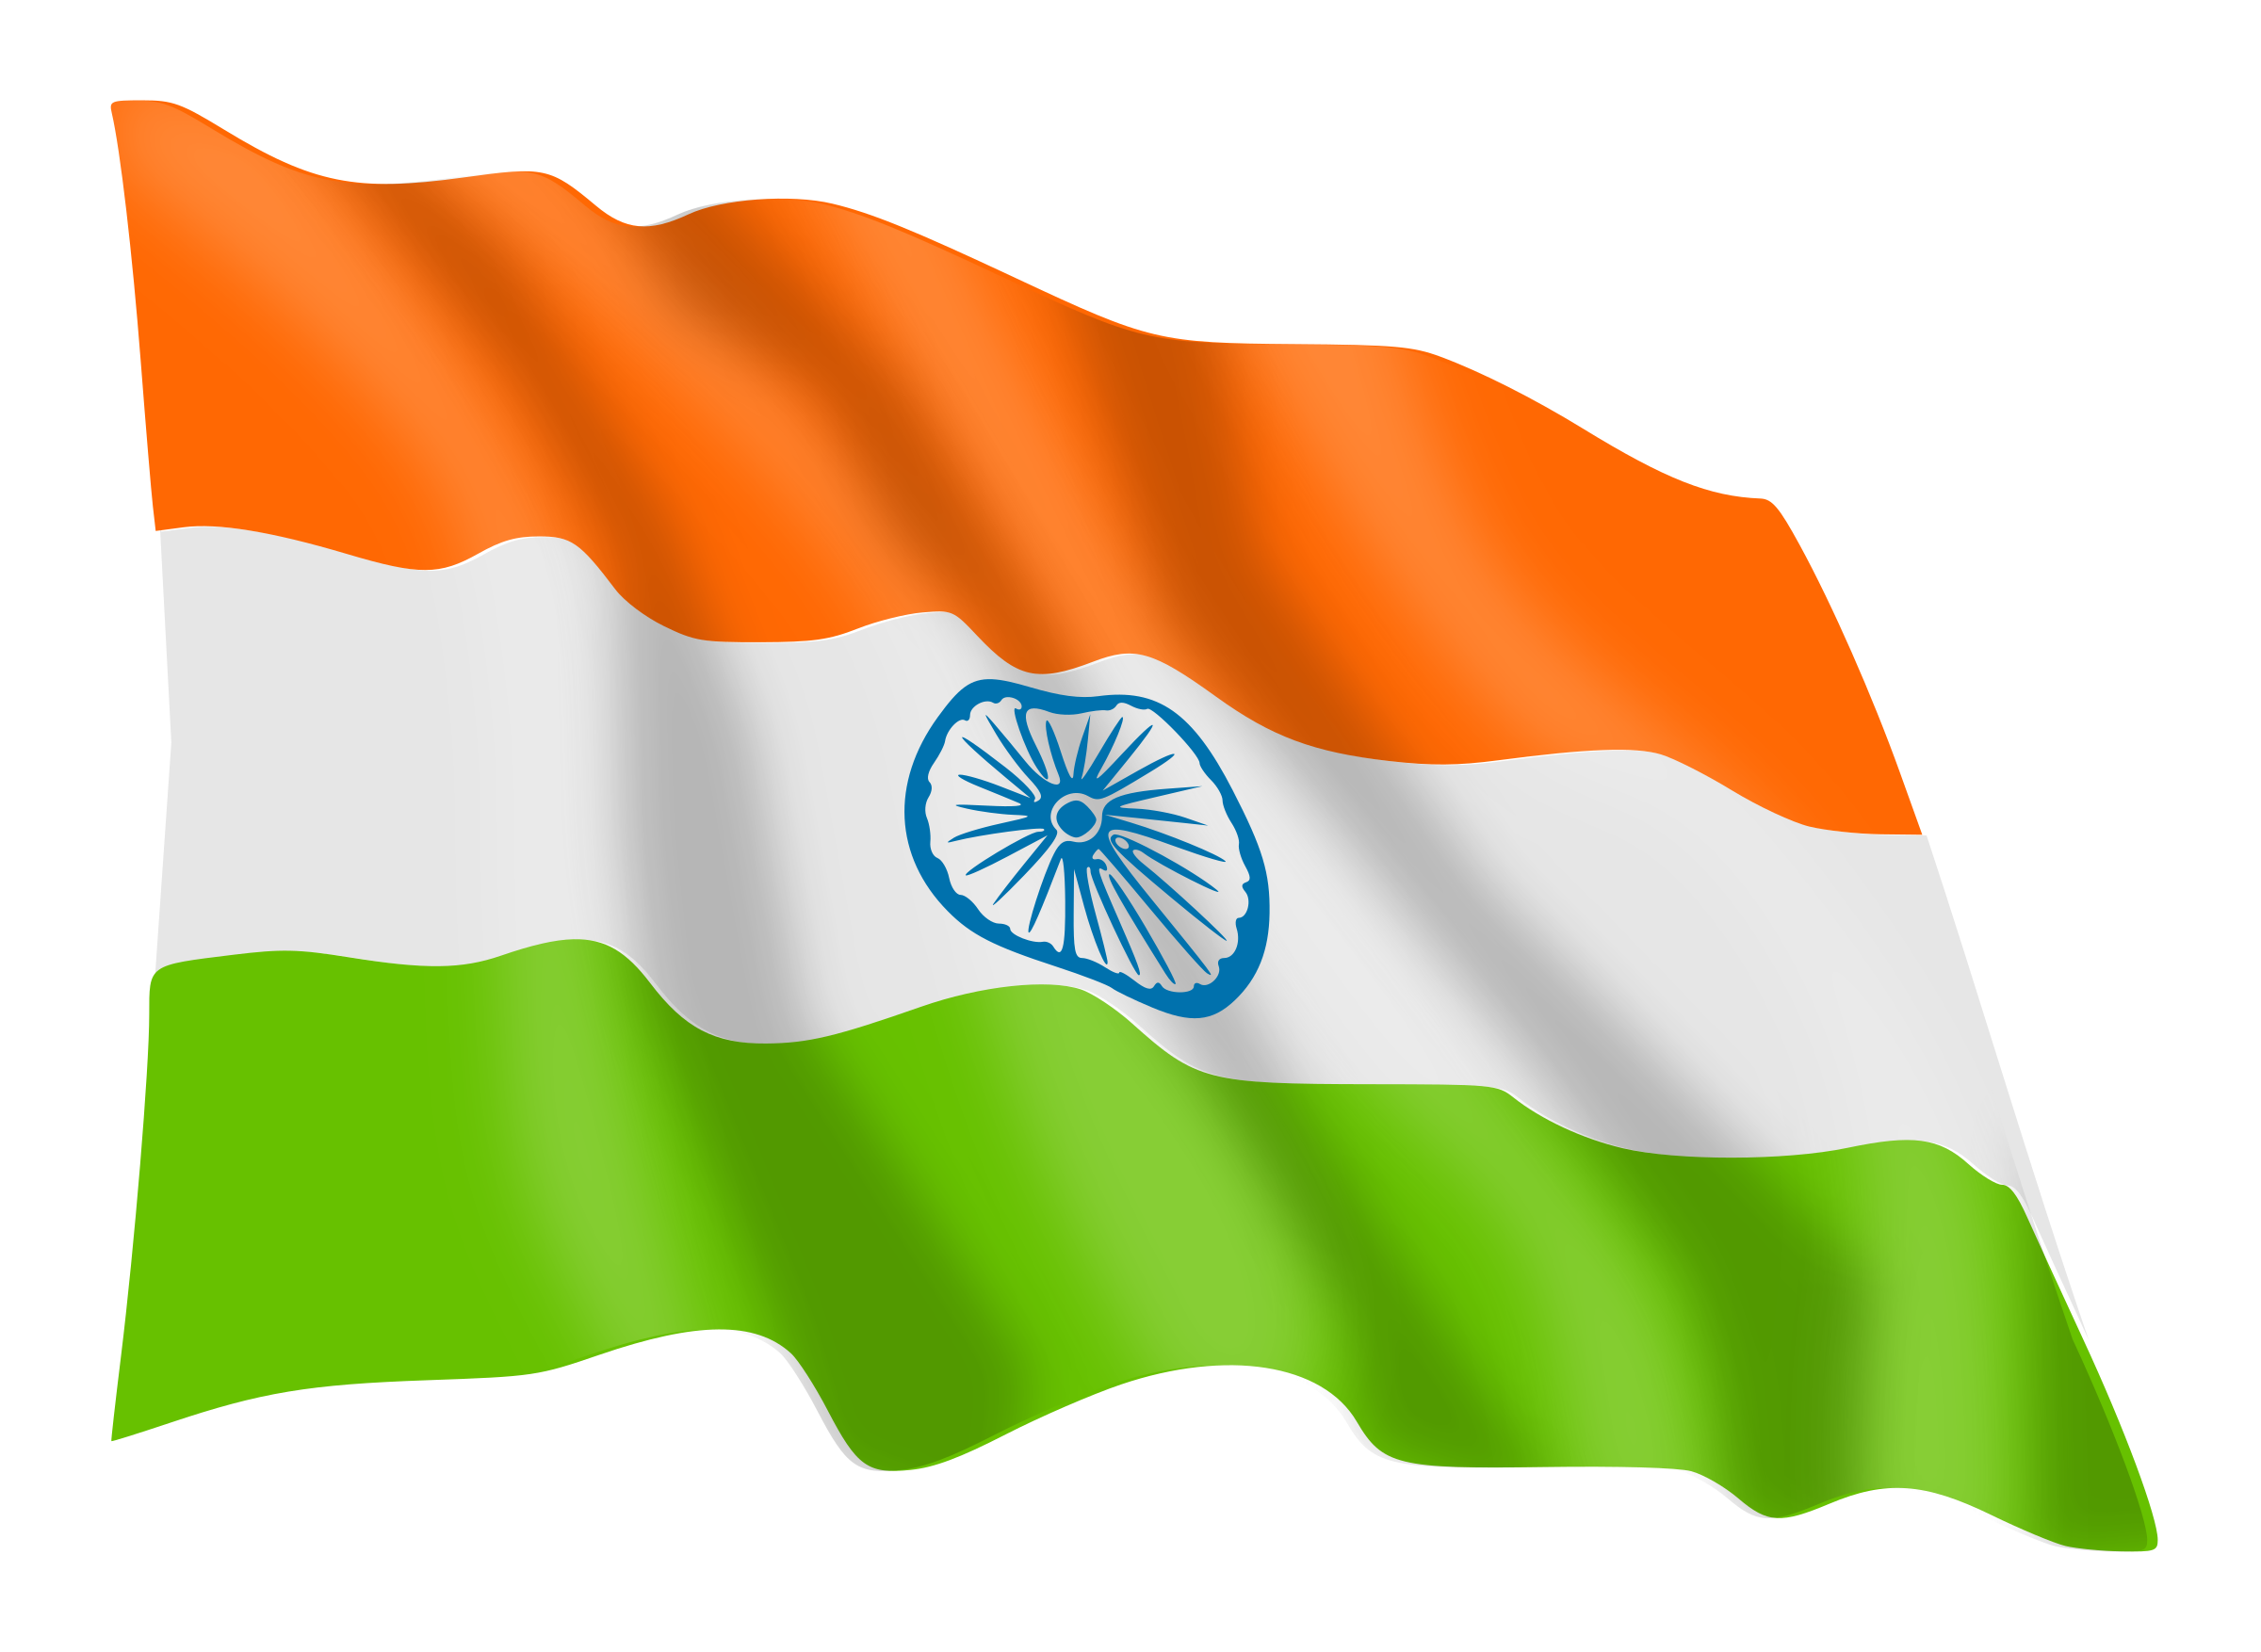 Download India Free PNG Photo Images And Clipart FreePNGImg